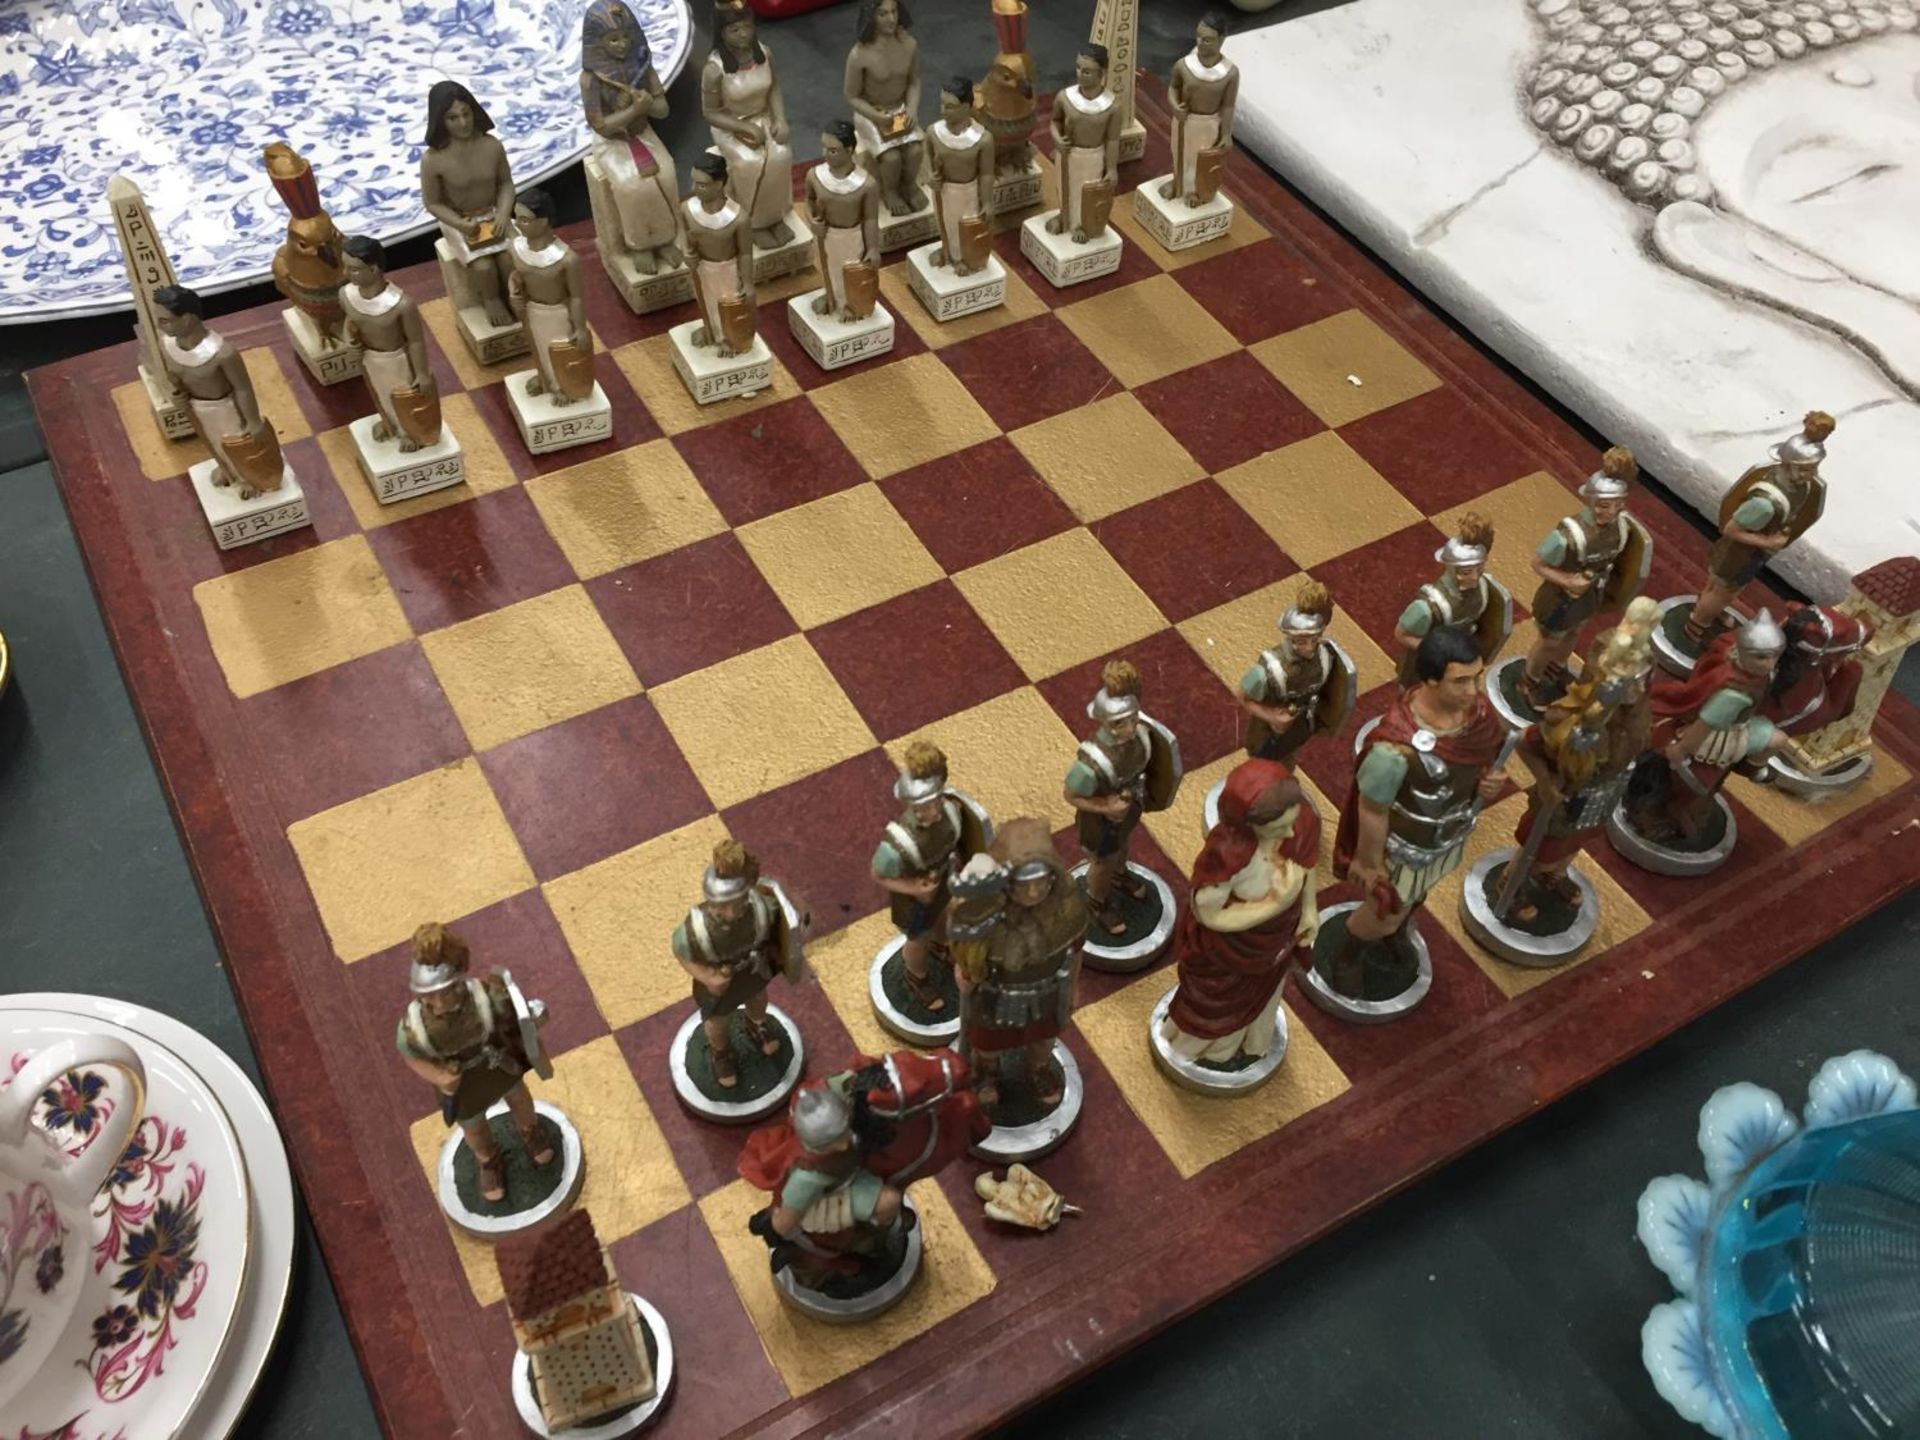 A HEAVY VINTAGE CHESS BOARD COMPLETE WITH ROMANS AND EGYPTIANS CHESS PIECES